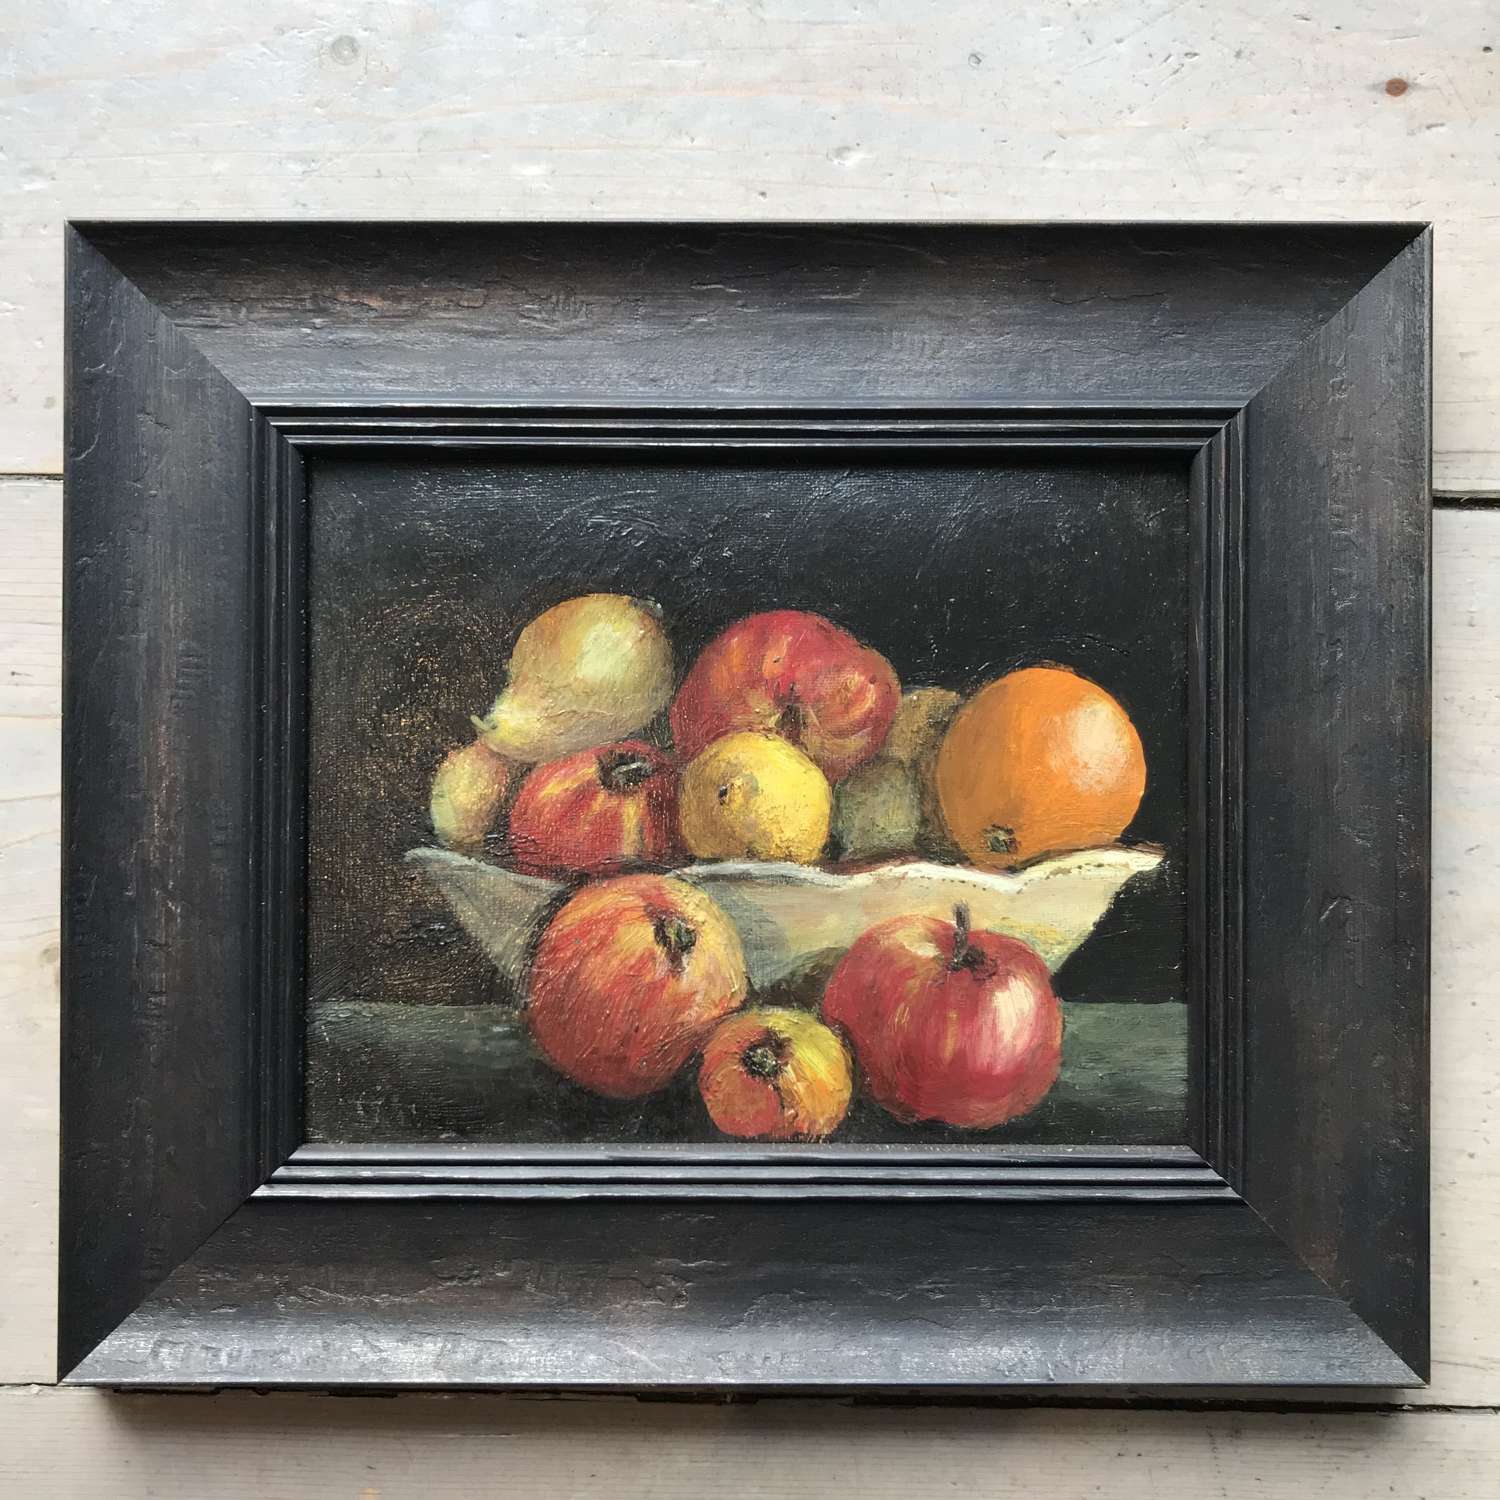 ‘Fruit bowl’. Oil on board by P M Walls